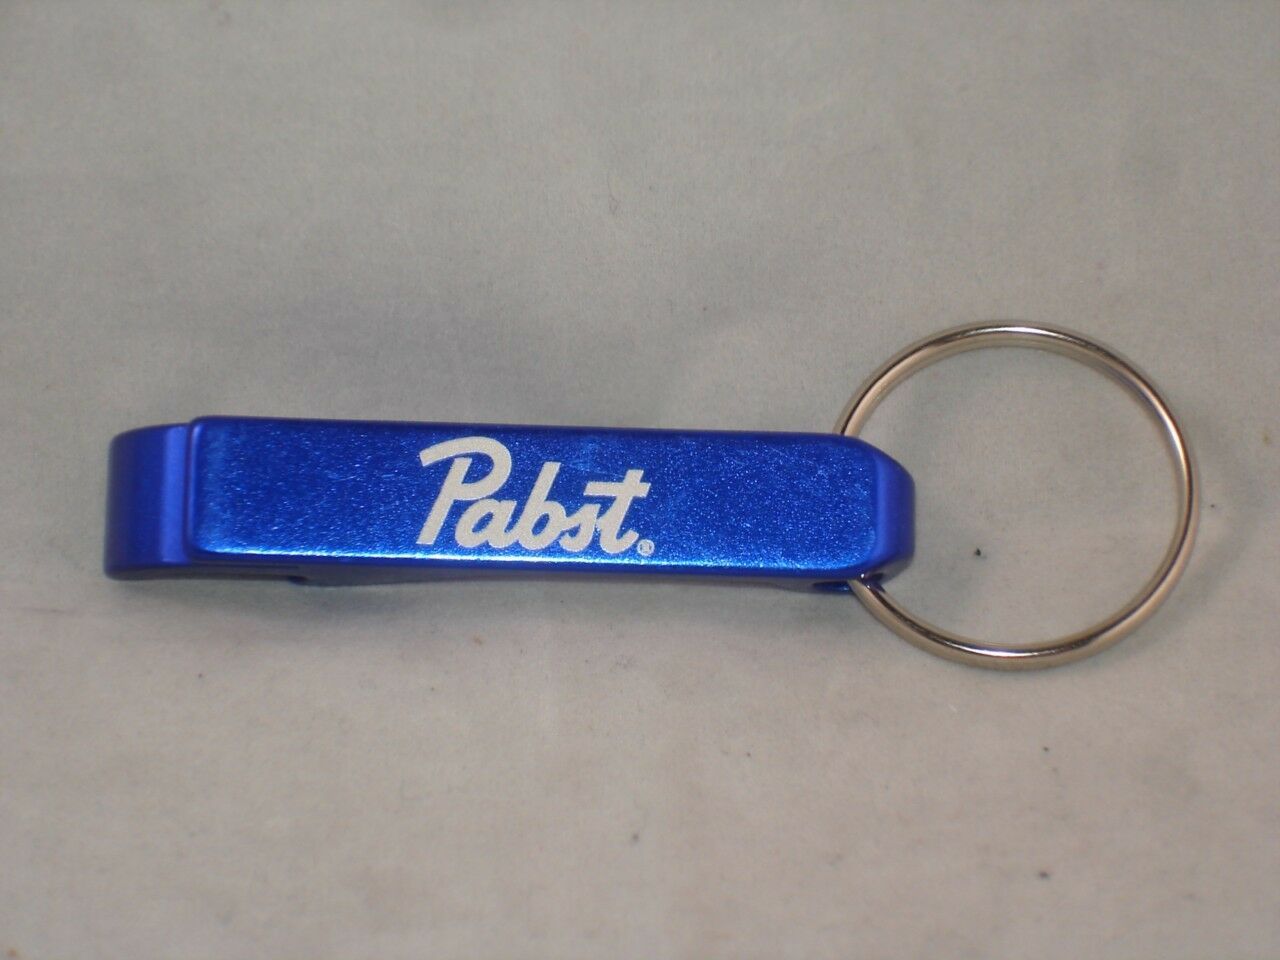 Primary image for NEW Pabst Blue Ribbon Beer Bottle Opener Keychain Blue Metal